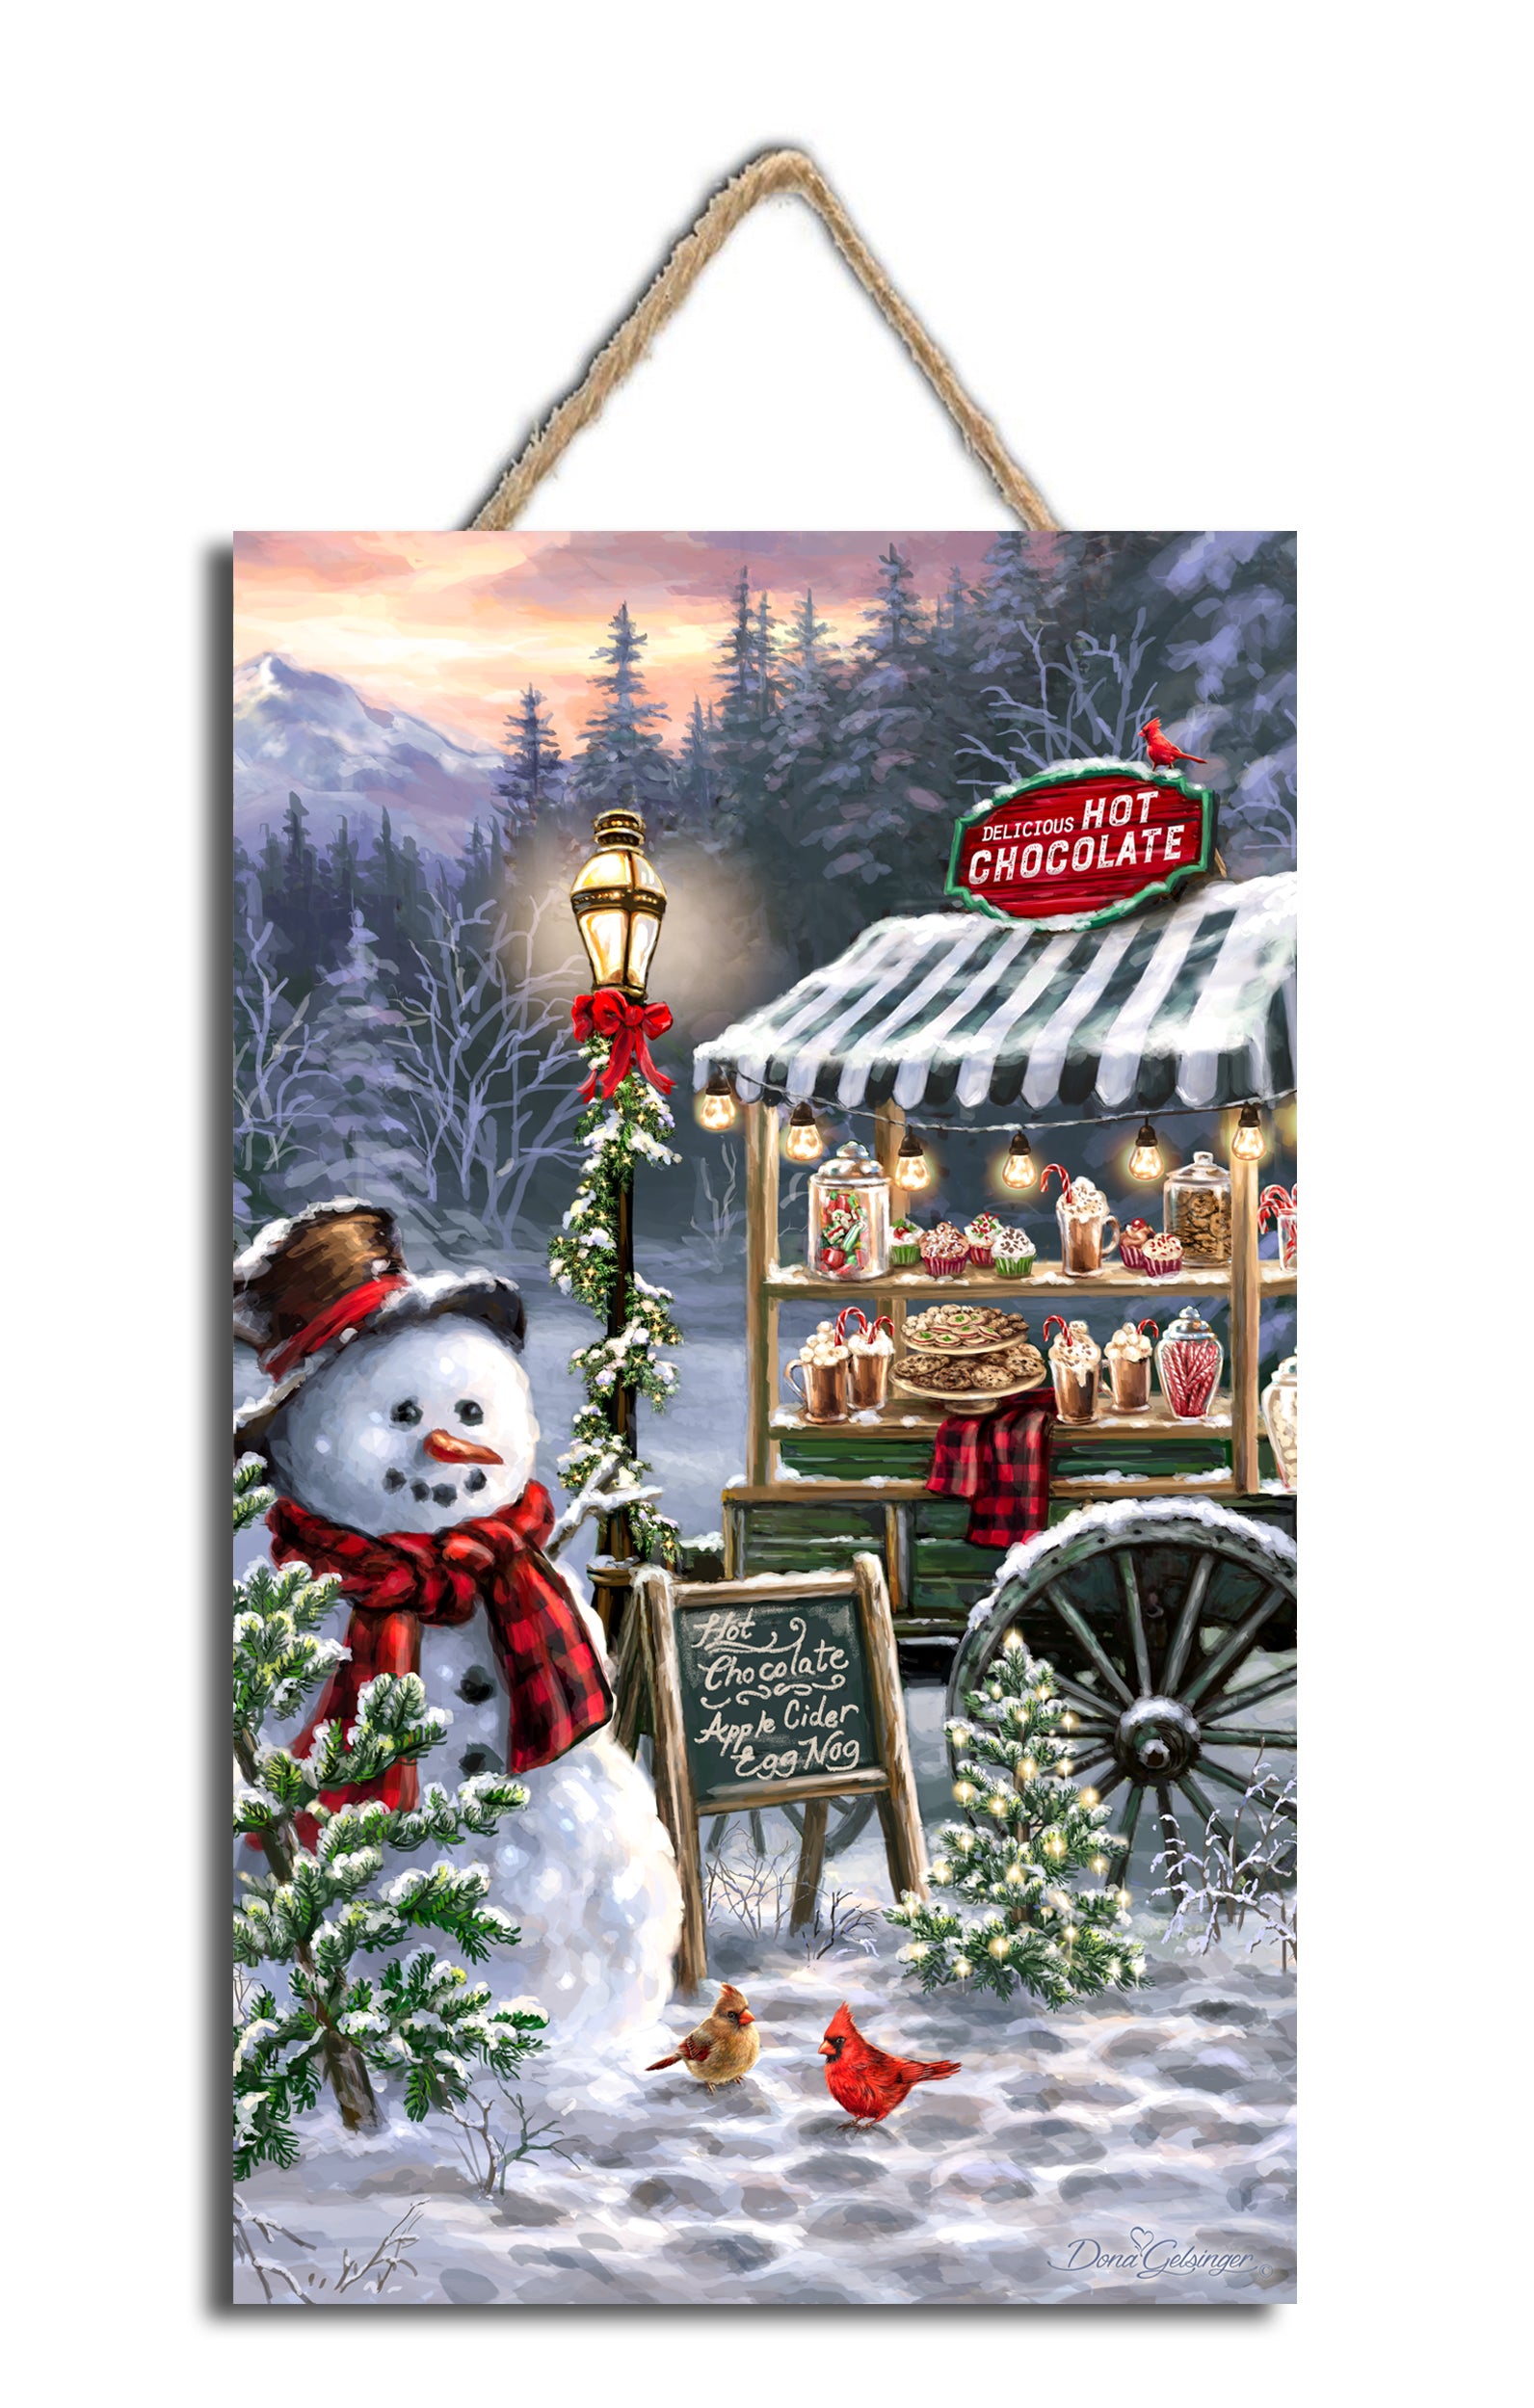 This delightful art piece features a jolly snowman surrounded by two playful cardinals, beckoning you to come and indulge in a sweet winter treat.  The sign points to a cozy hot chocolate stand, filled to the brim with rich, velvety hot chocolate, freshly baked cookies, scrumptious cupcakes, and candy canes